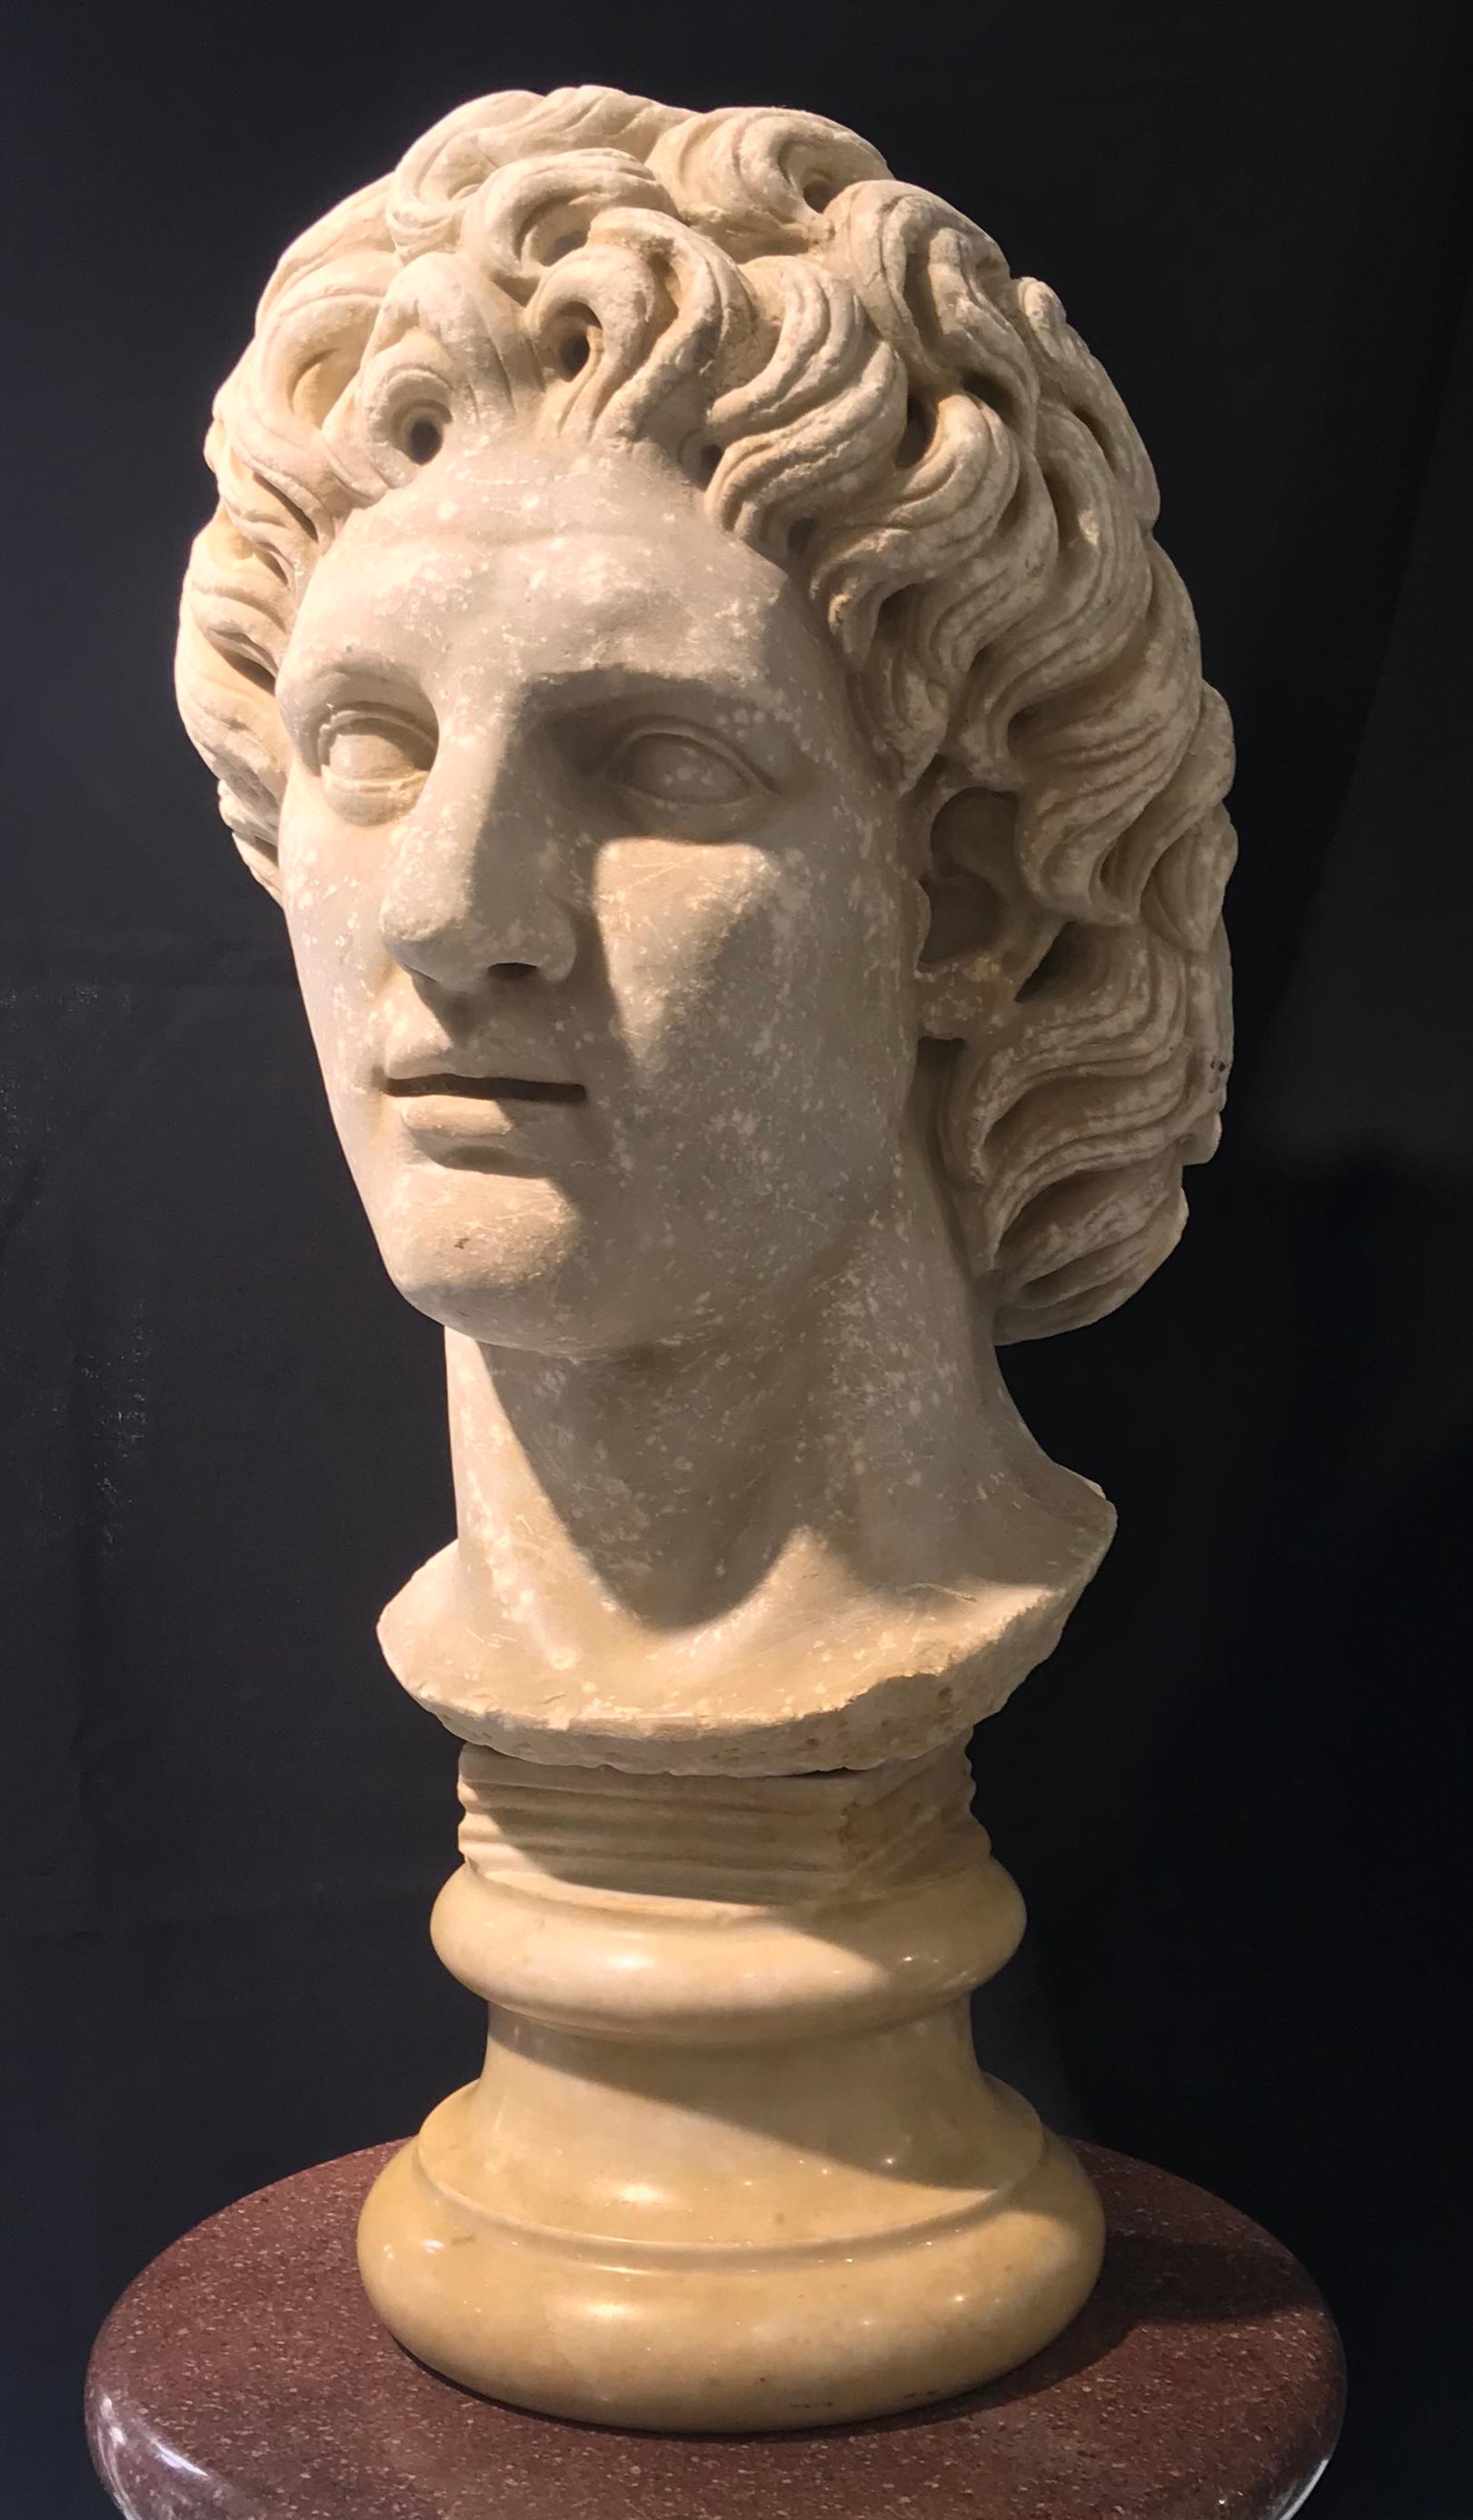 A very impressive and important sculpture of Alexander the Great, carved by hand in white Italian marble as classical style. Alexander the Great was Alexander III of Macedon (20/21 July 356 BC – 10/11 June 323 BC), commonly known as Alexander the